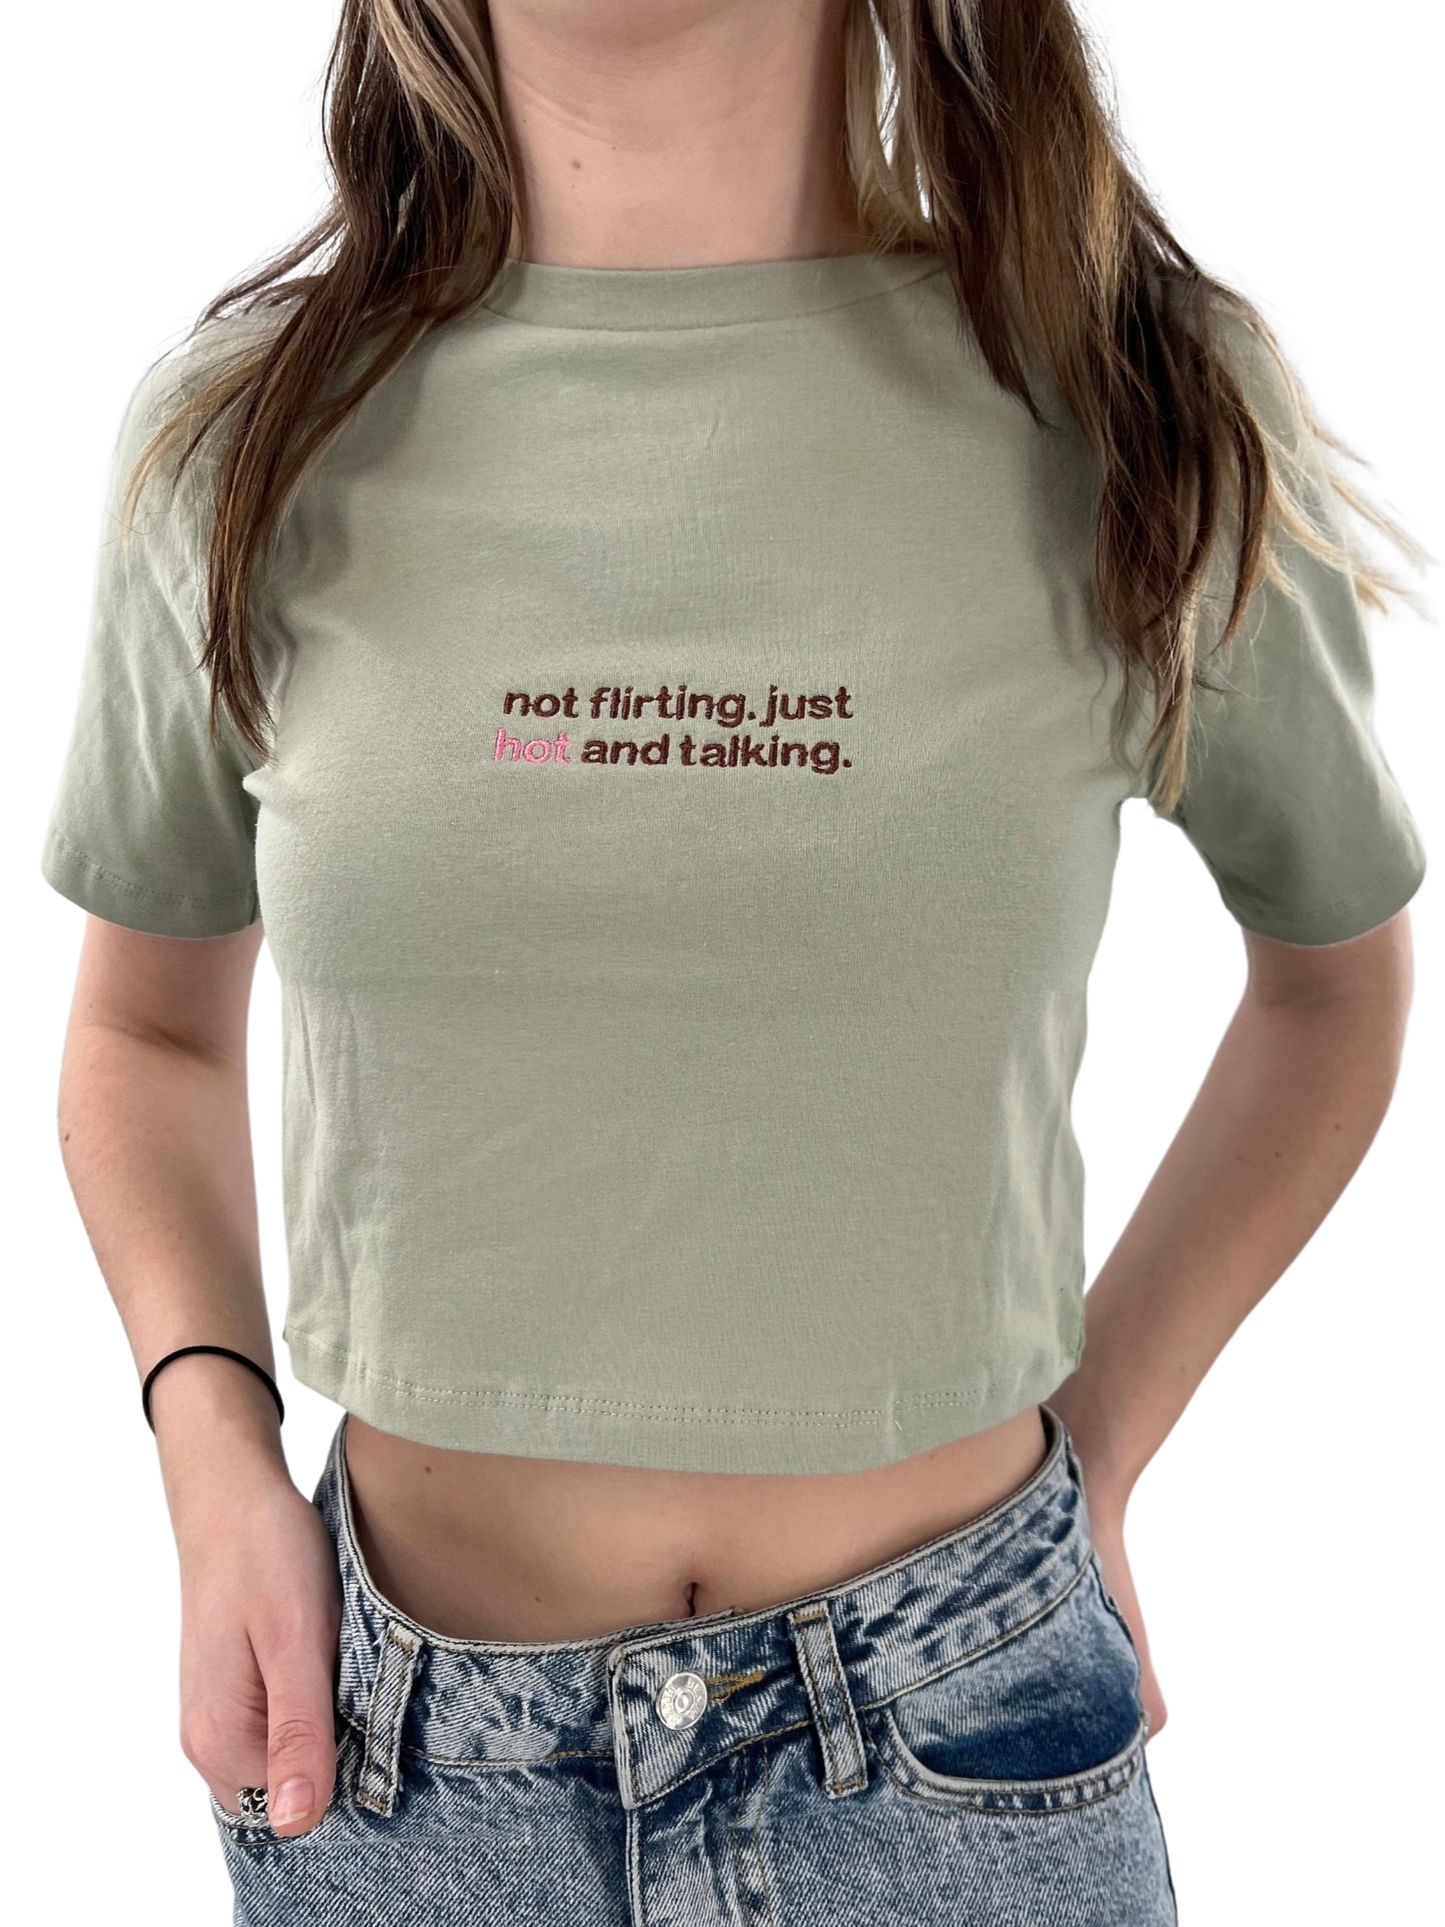 Not Flirting Just Hot and Talking Embroidered Crop Top